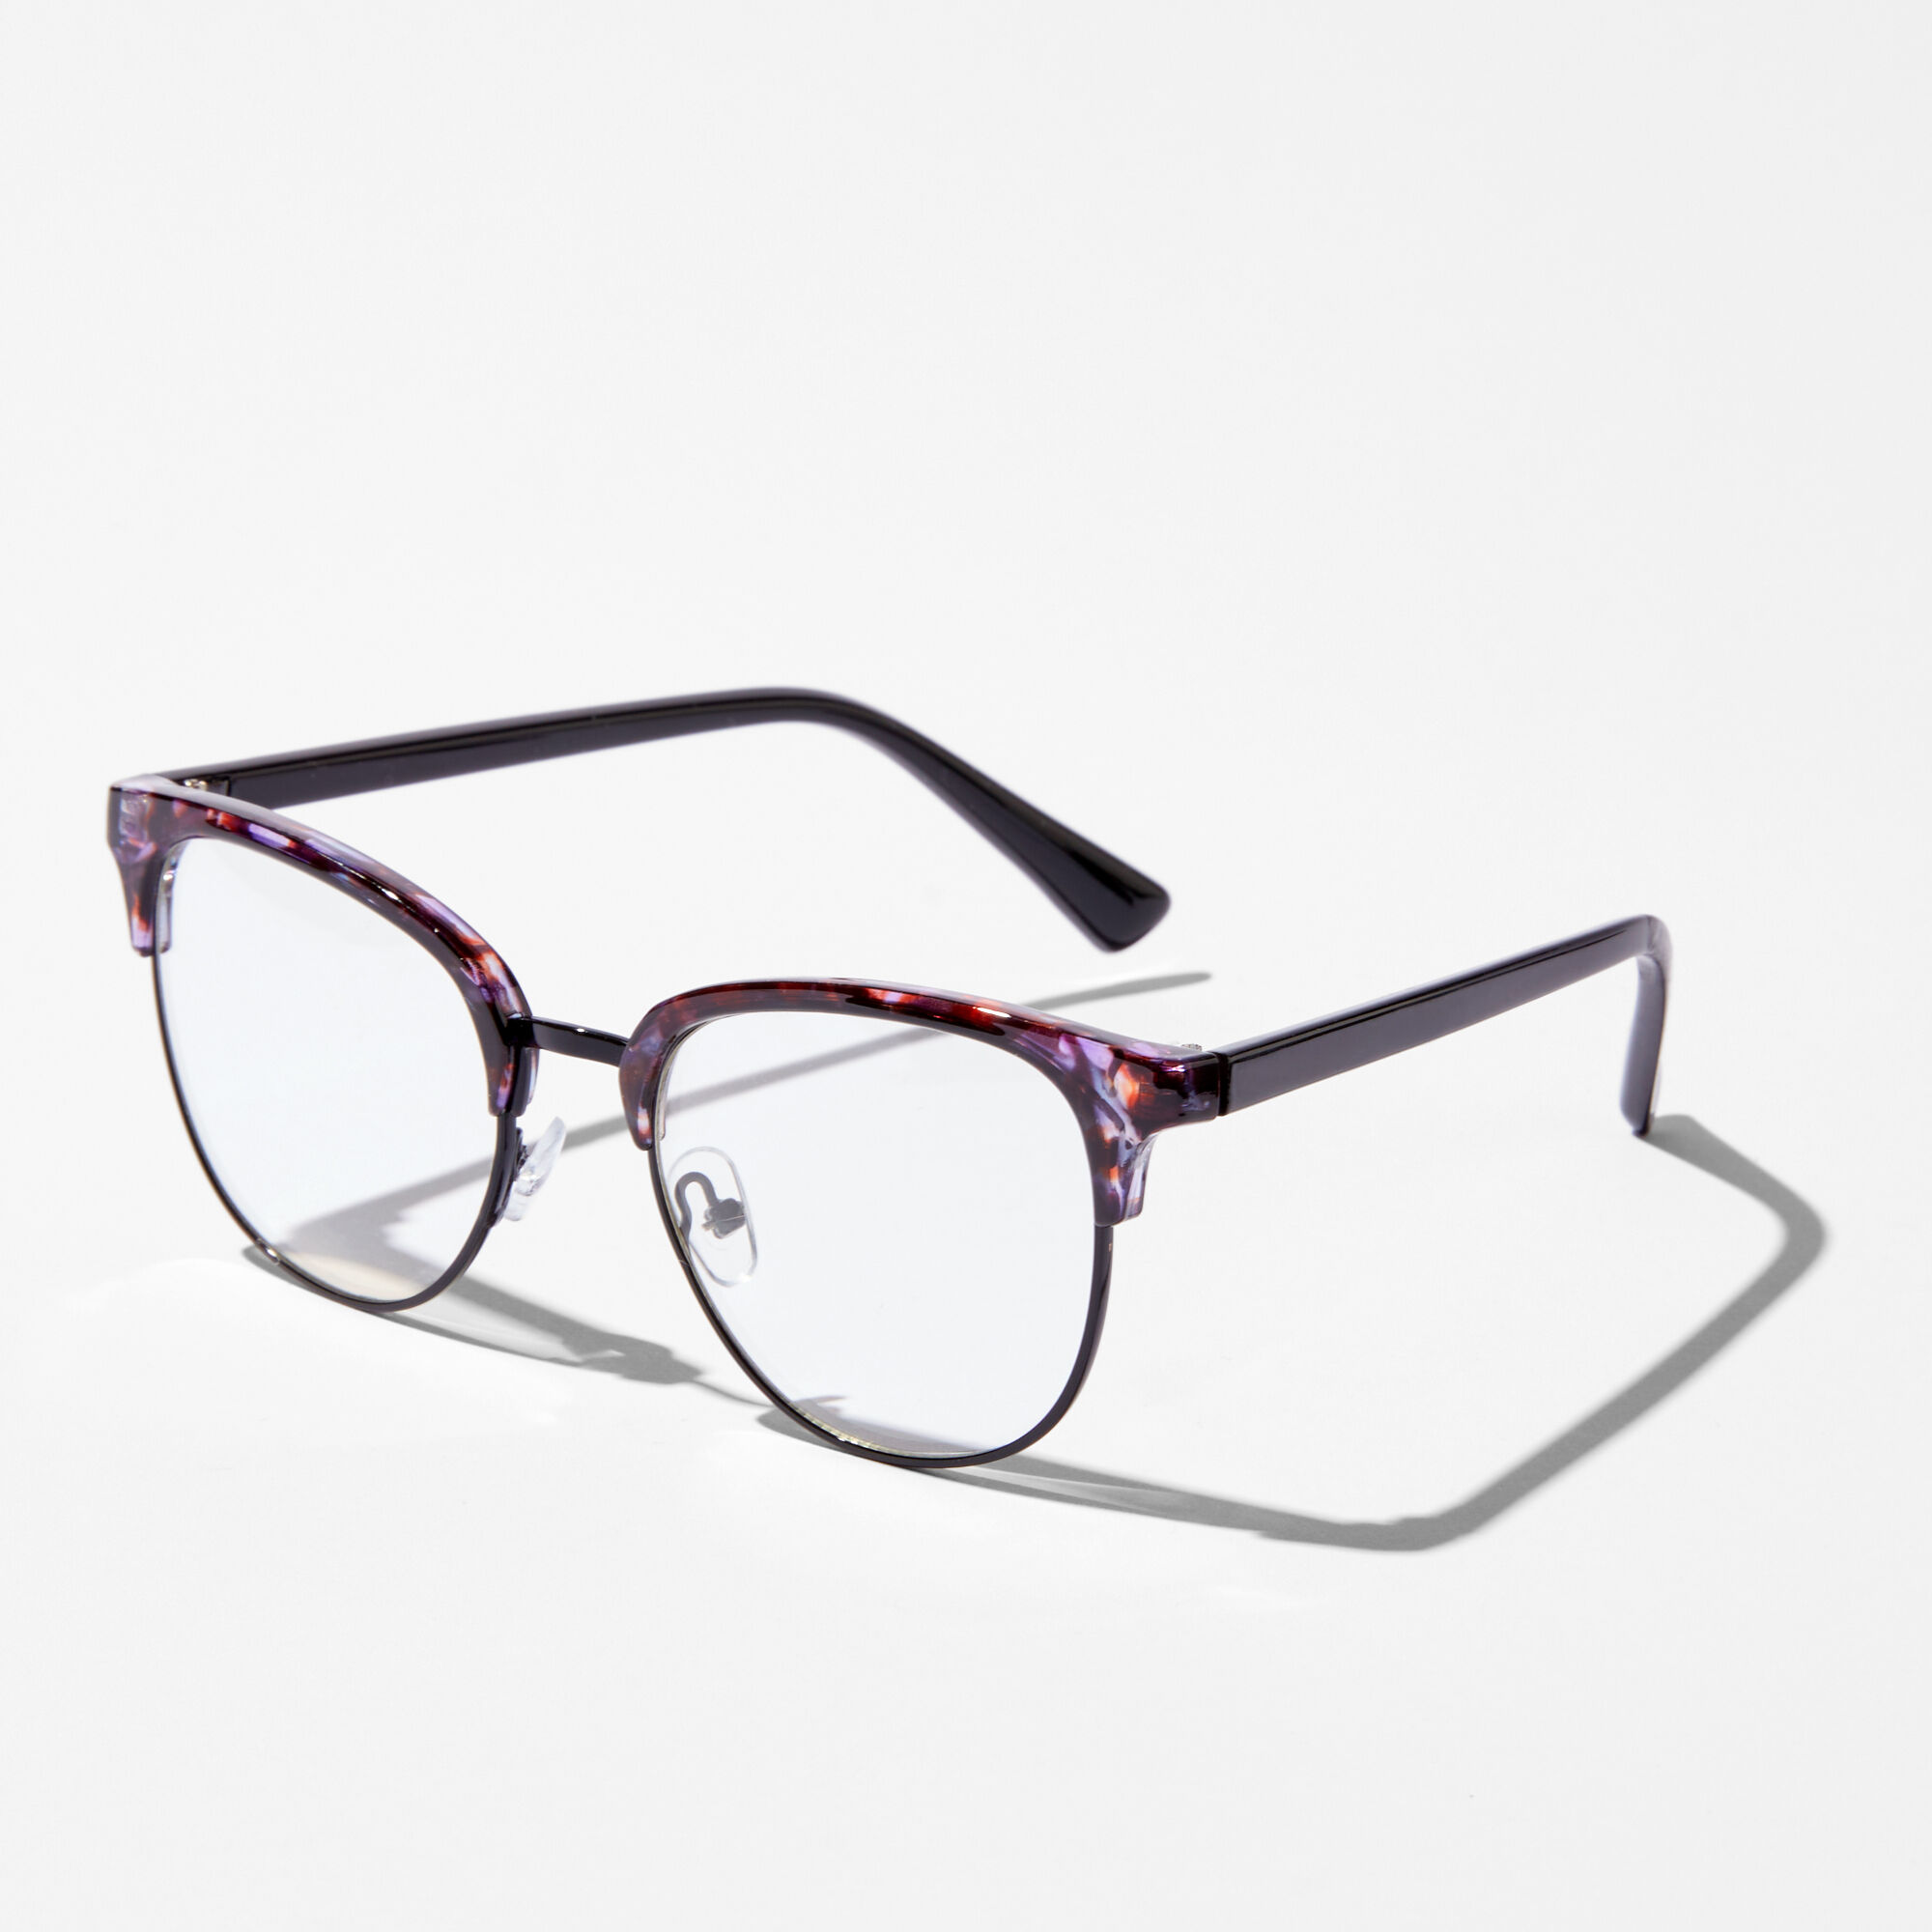 View Claires Tortoiseshell Browline Clear Lens Frames Purple information